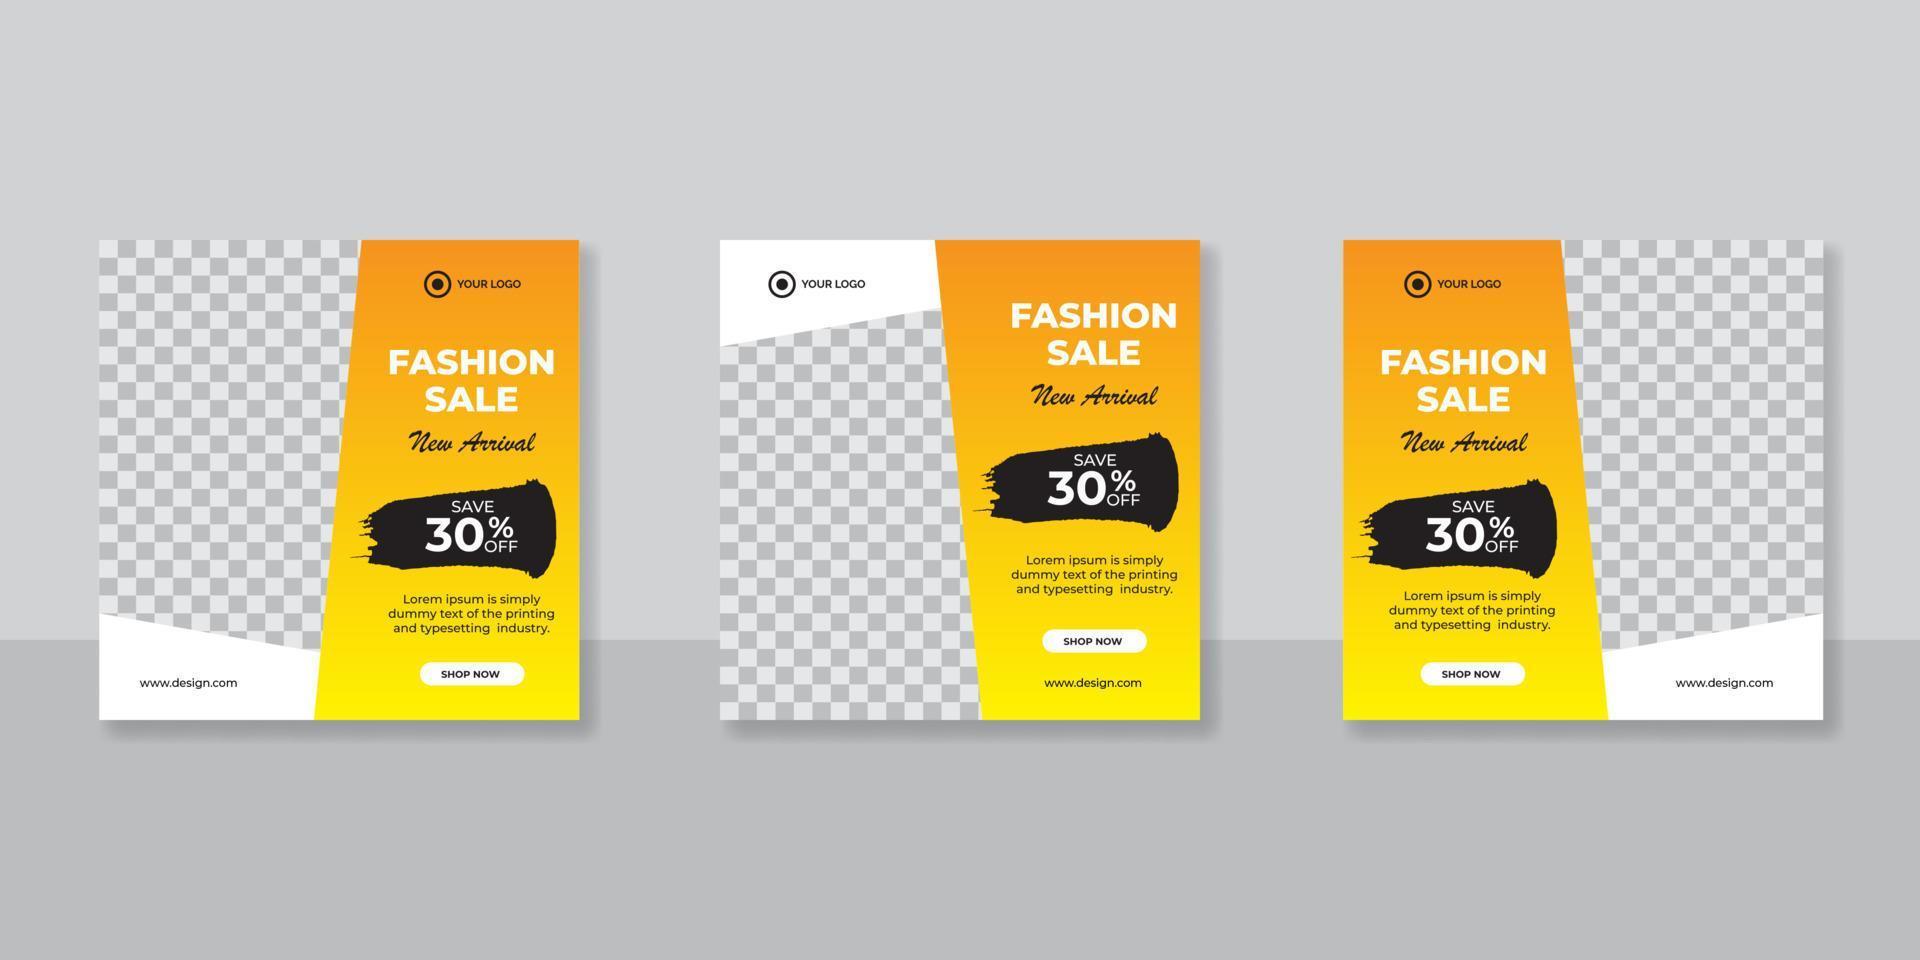 Fashion sale banner for social media post template vector